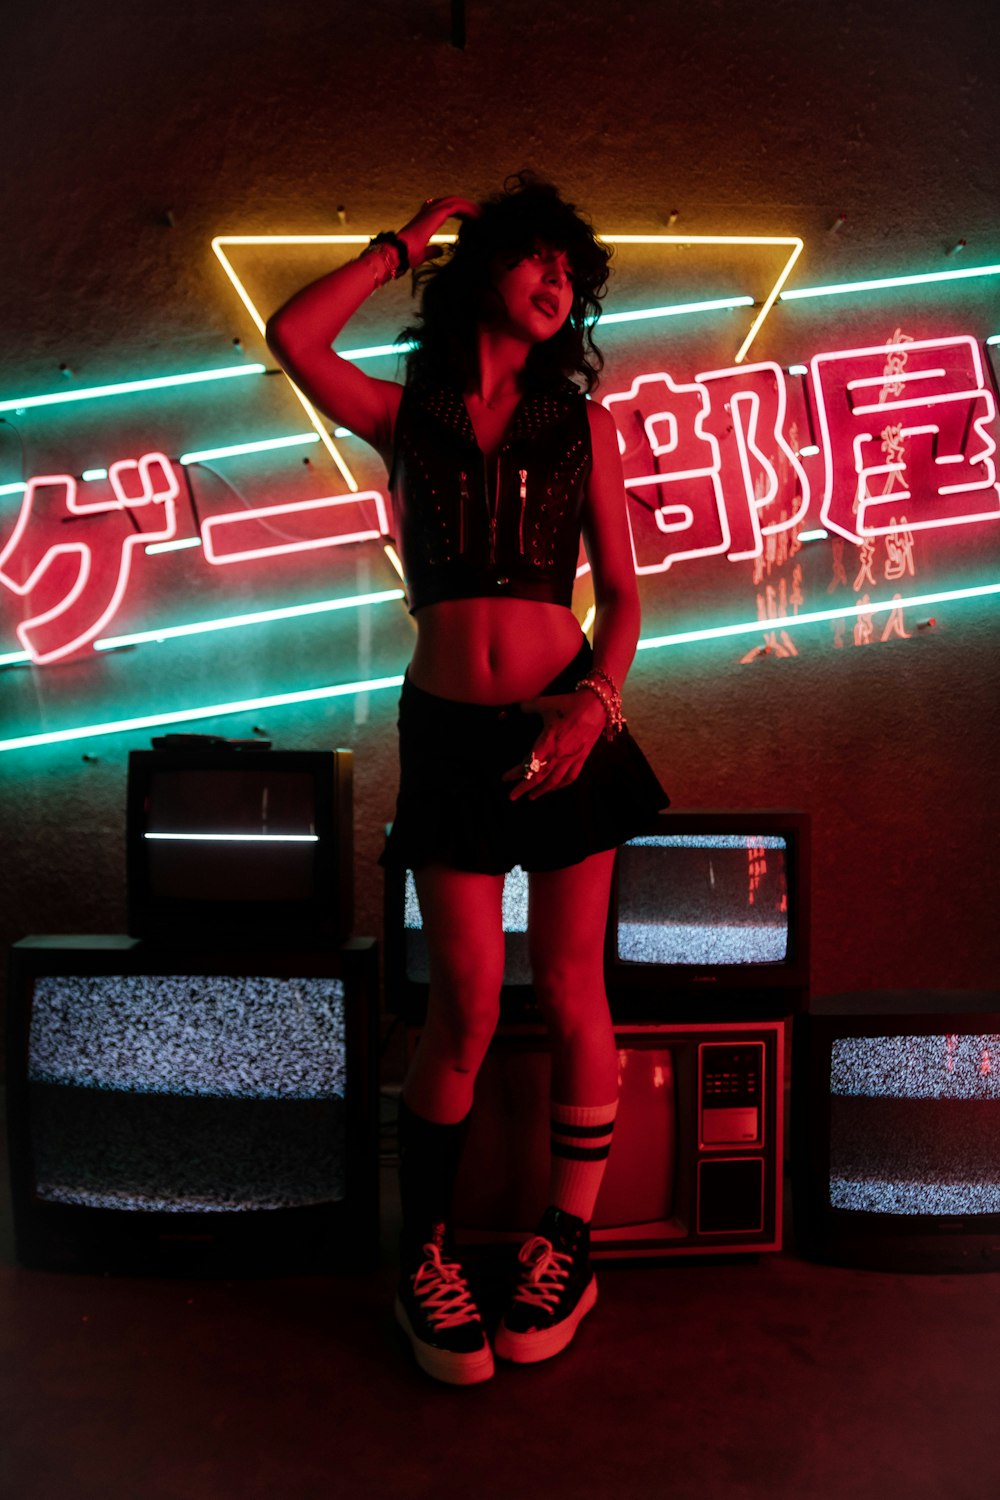 woman in black tank top and red shorts standing on black and red neon light signage